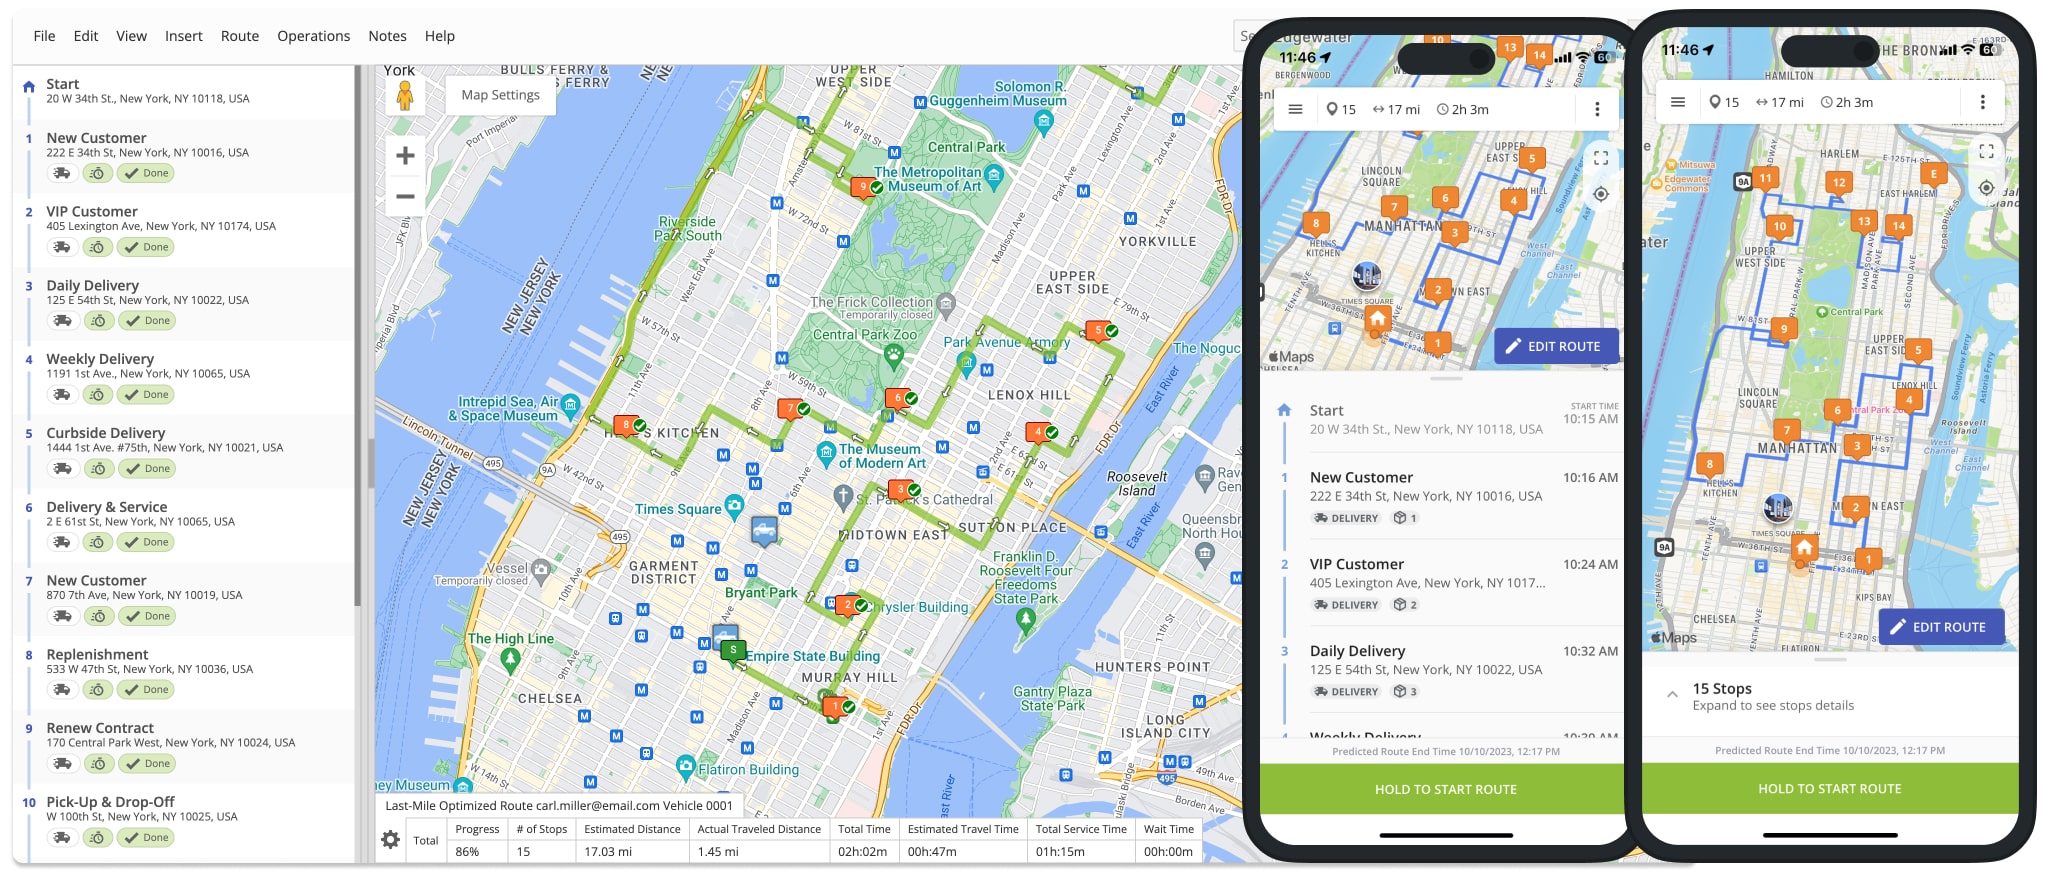 Real-time route data synchronization across multiple devices and accounts between Route4Me's iPhone Route Planner app and Web Platform.